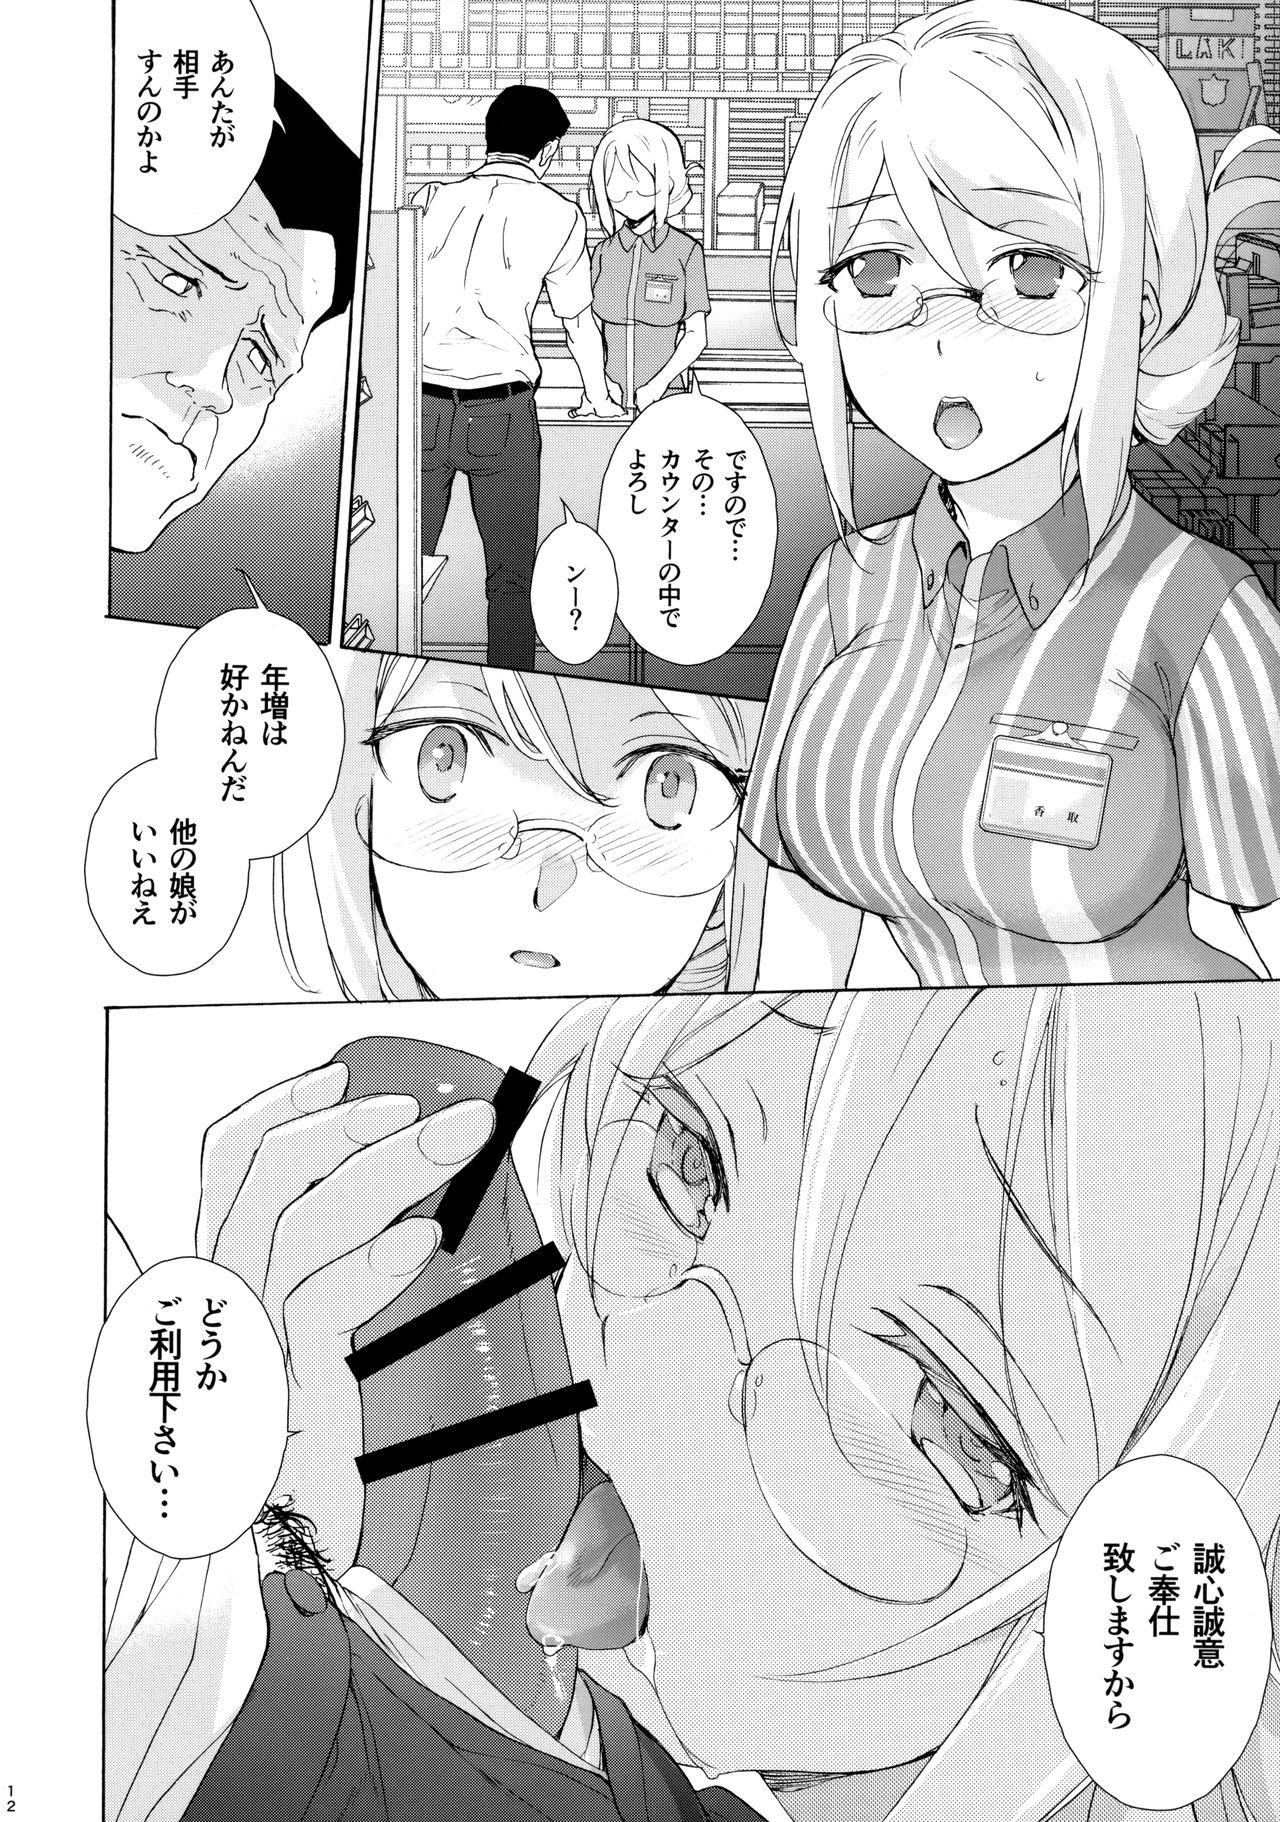 Hunks Shoppi! - Kantai collection Exposed - Page 11